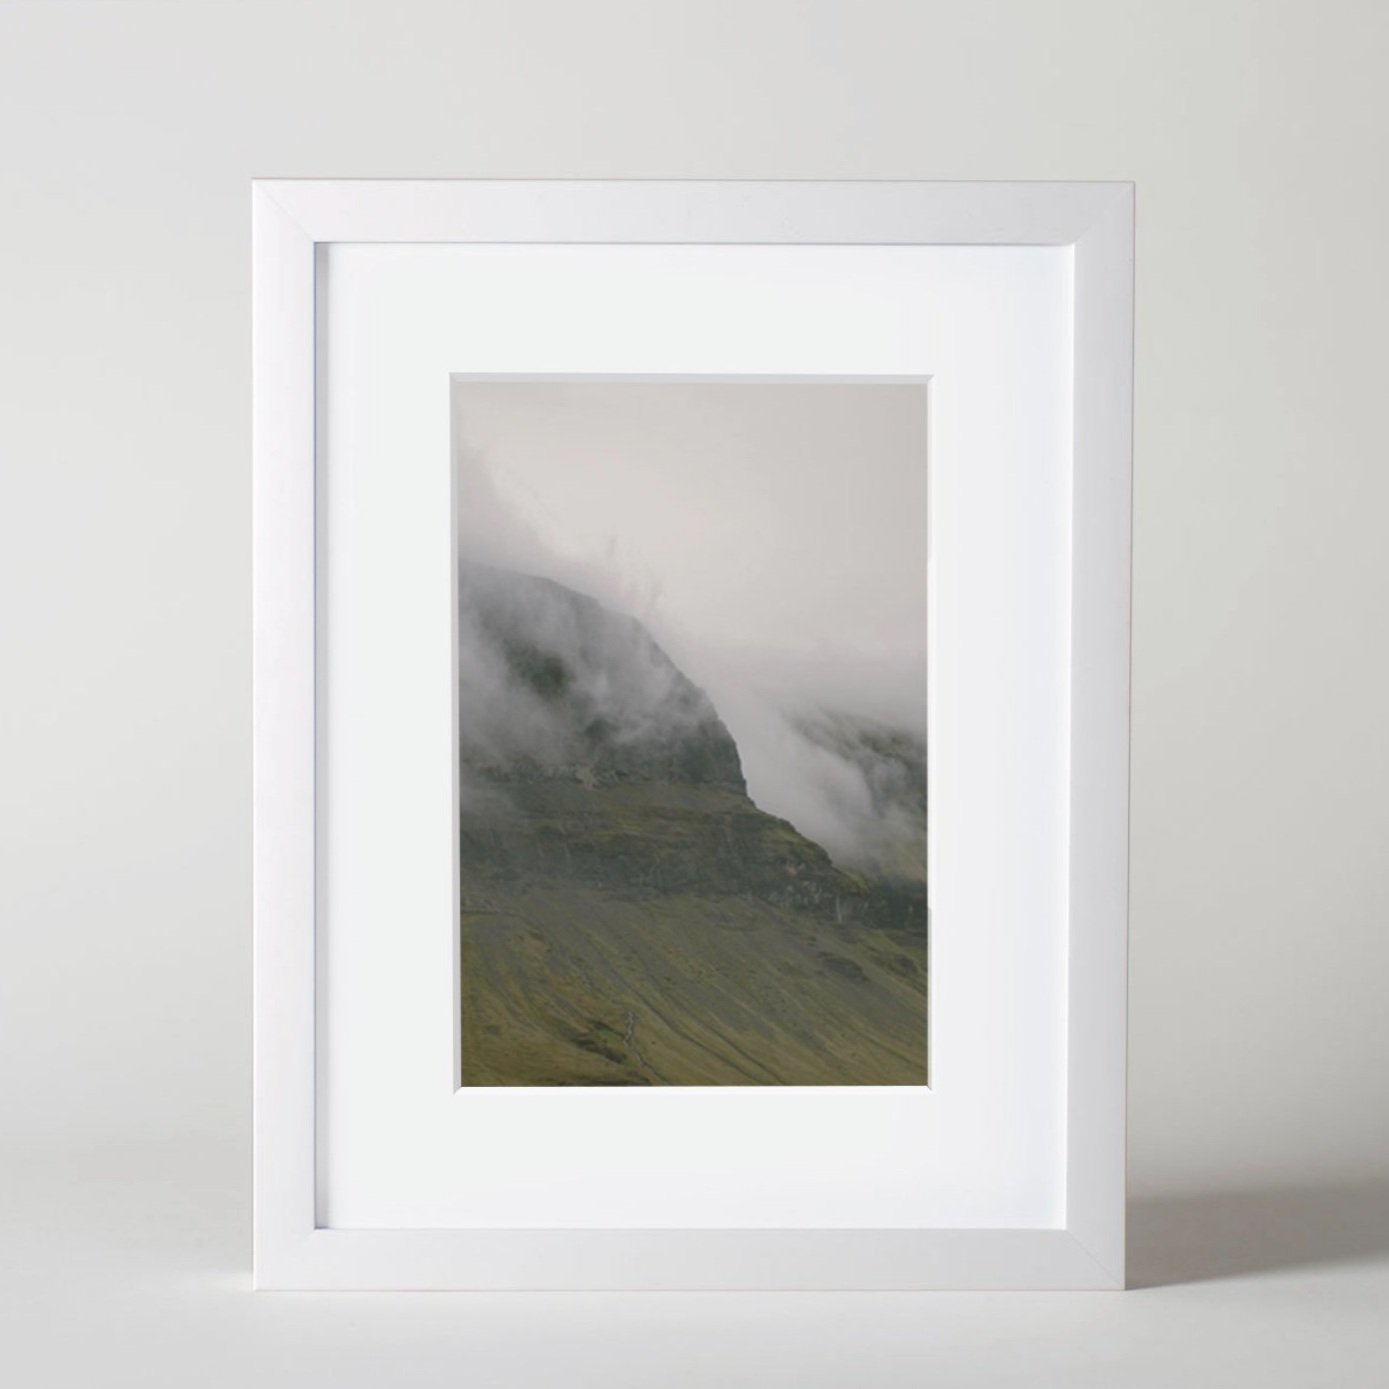 Products+matted+framed+print.jpg